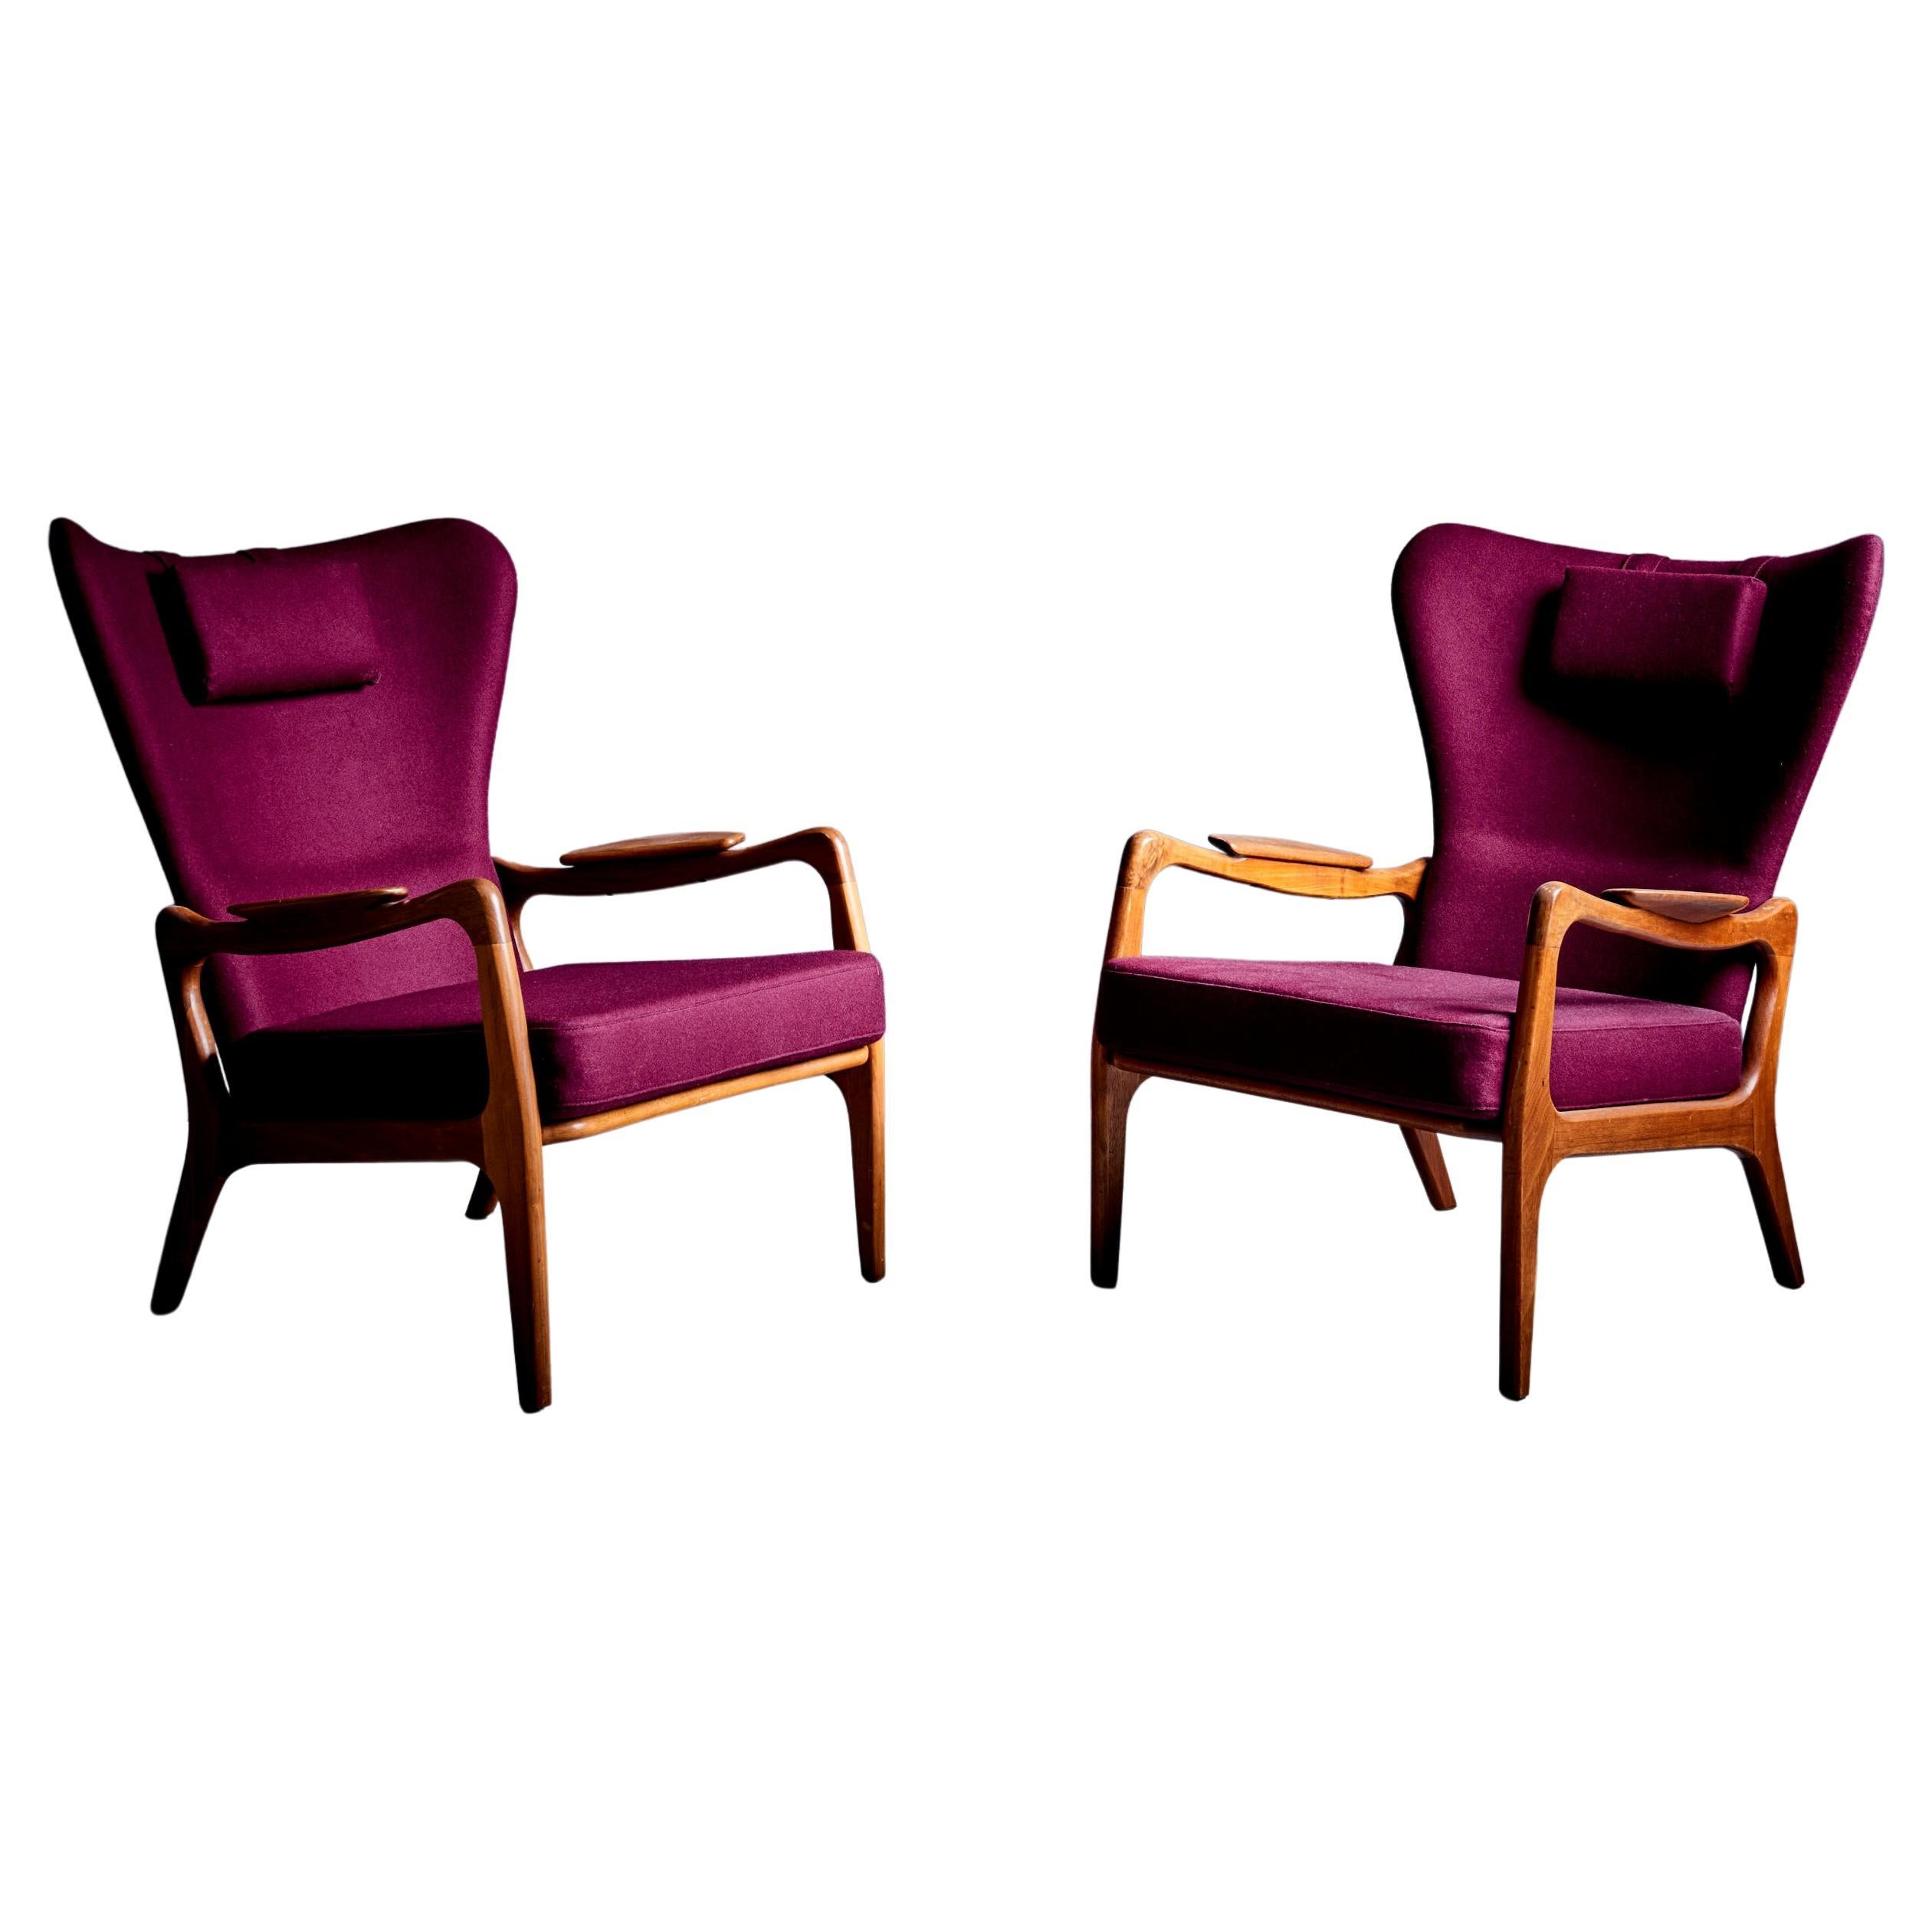 Newly Restored Pair of Plum Adrian Pearsall High Back Wing Lounge Chair 1950s For Sale